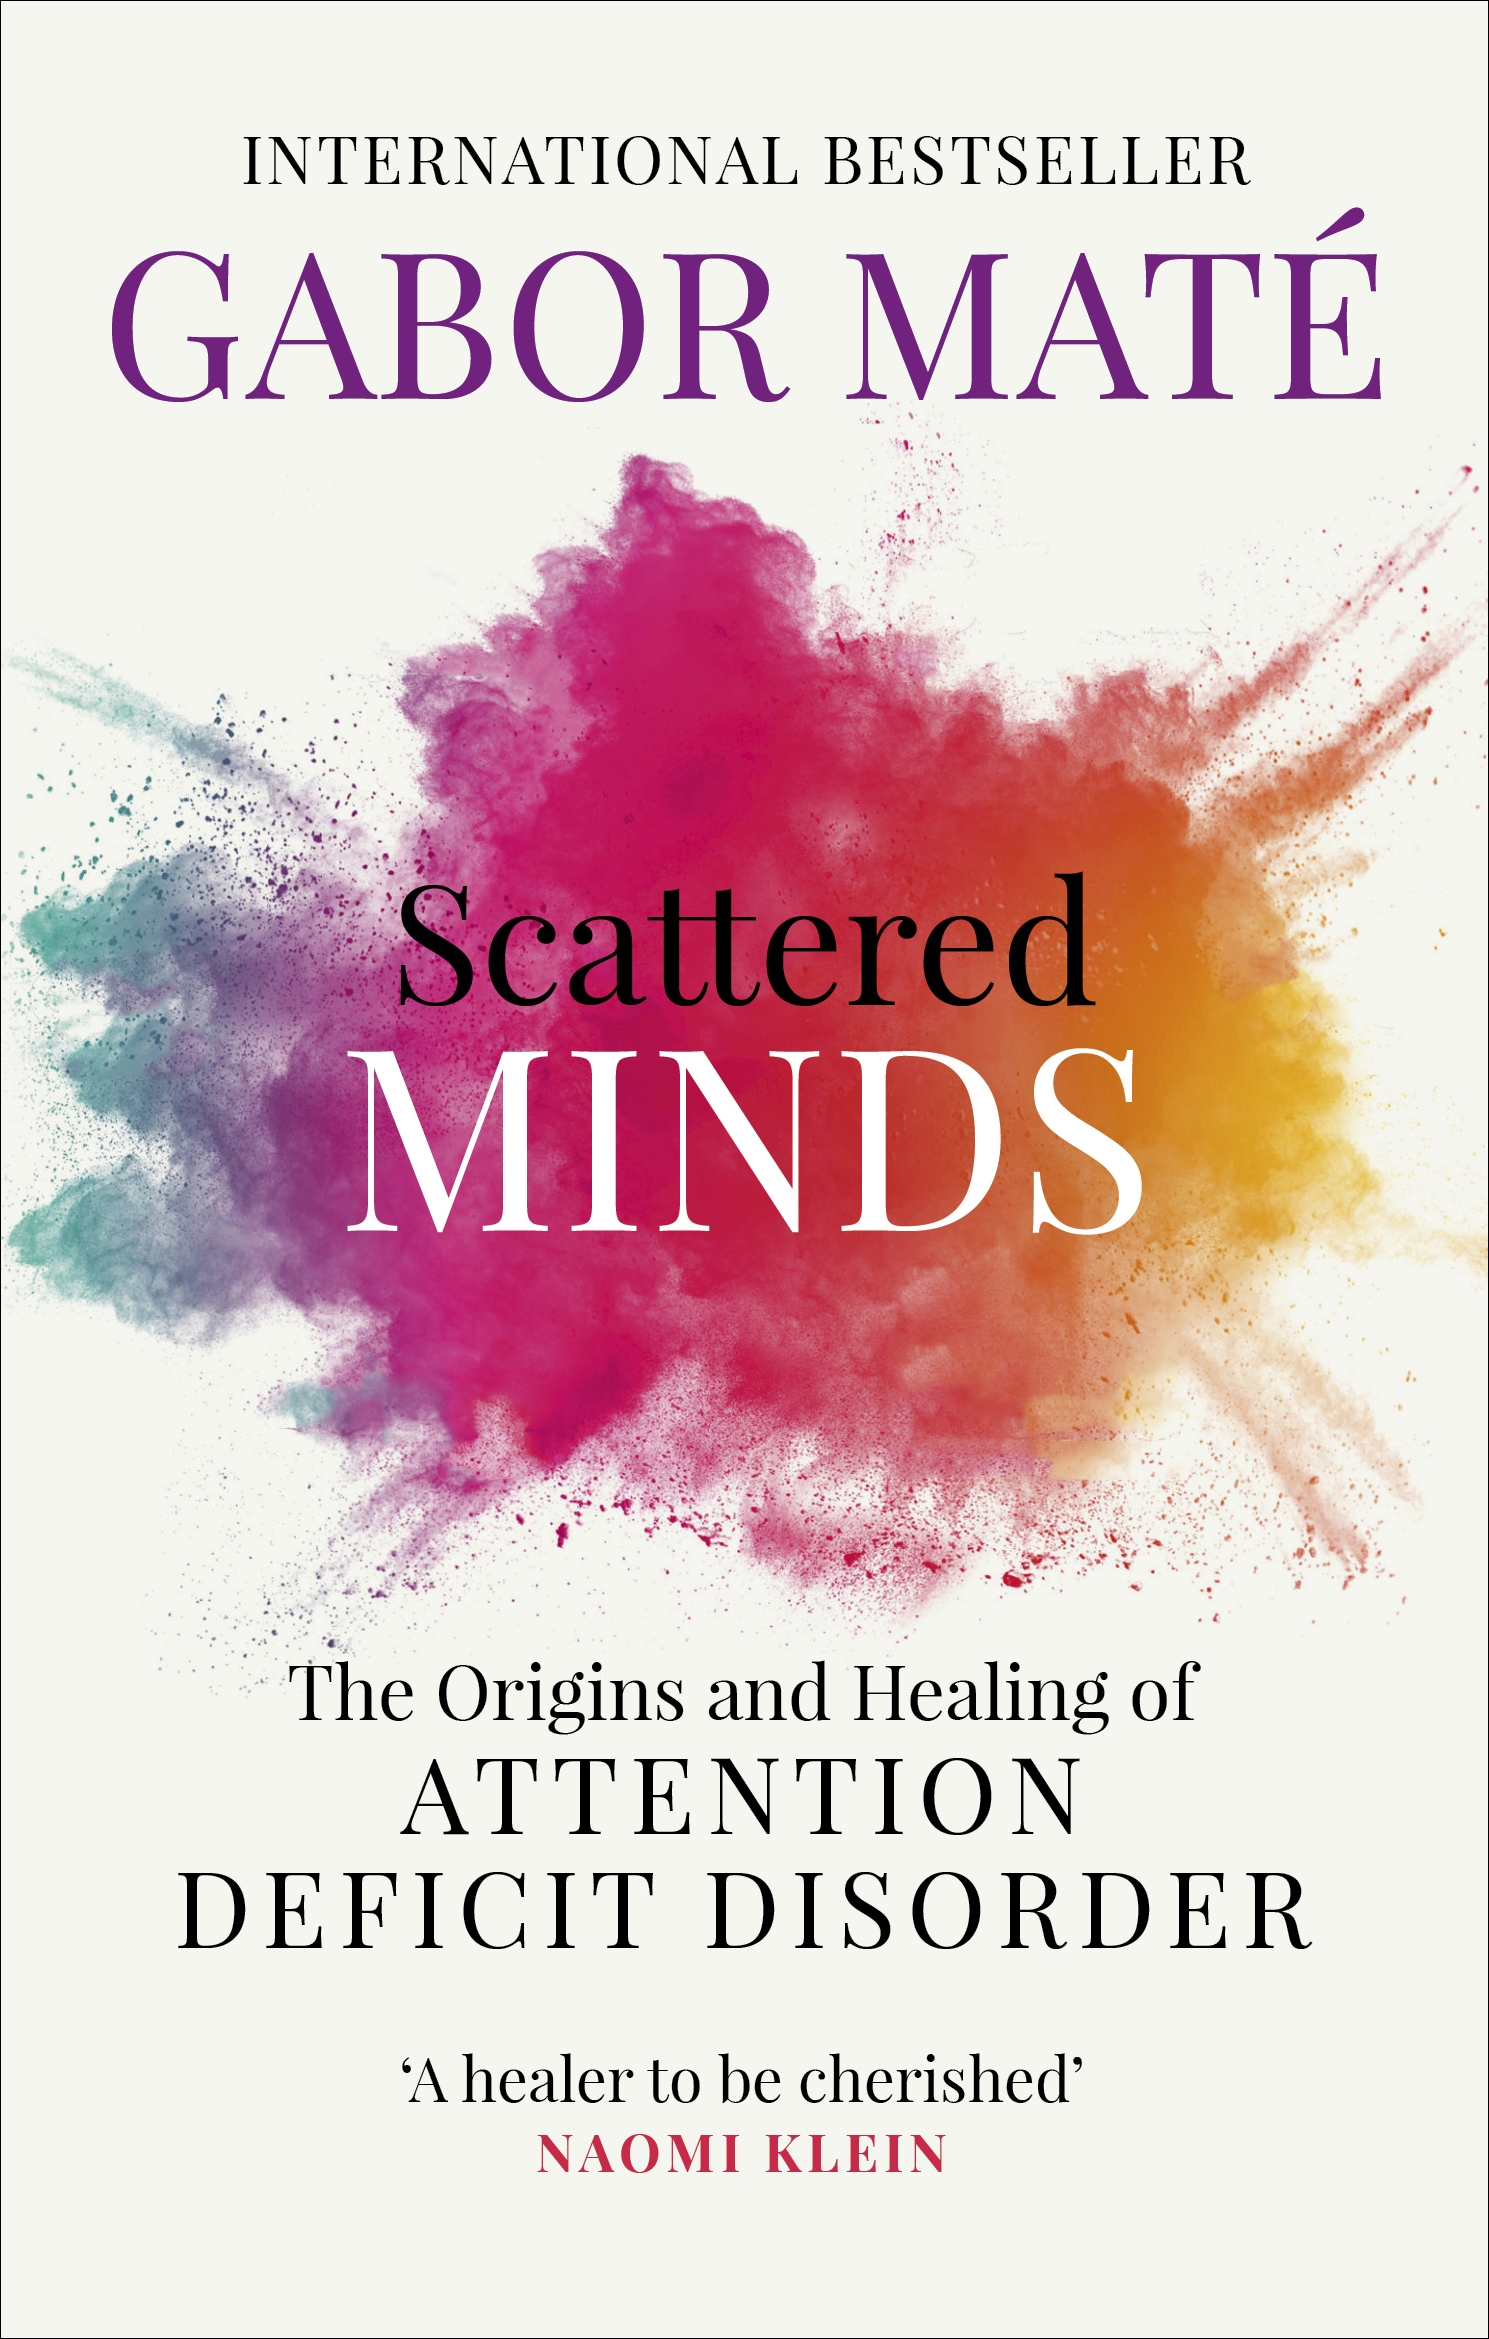 Scattered Minds by Gabor Mate